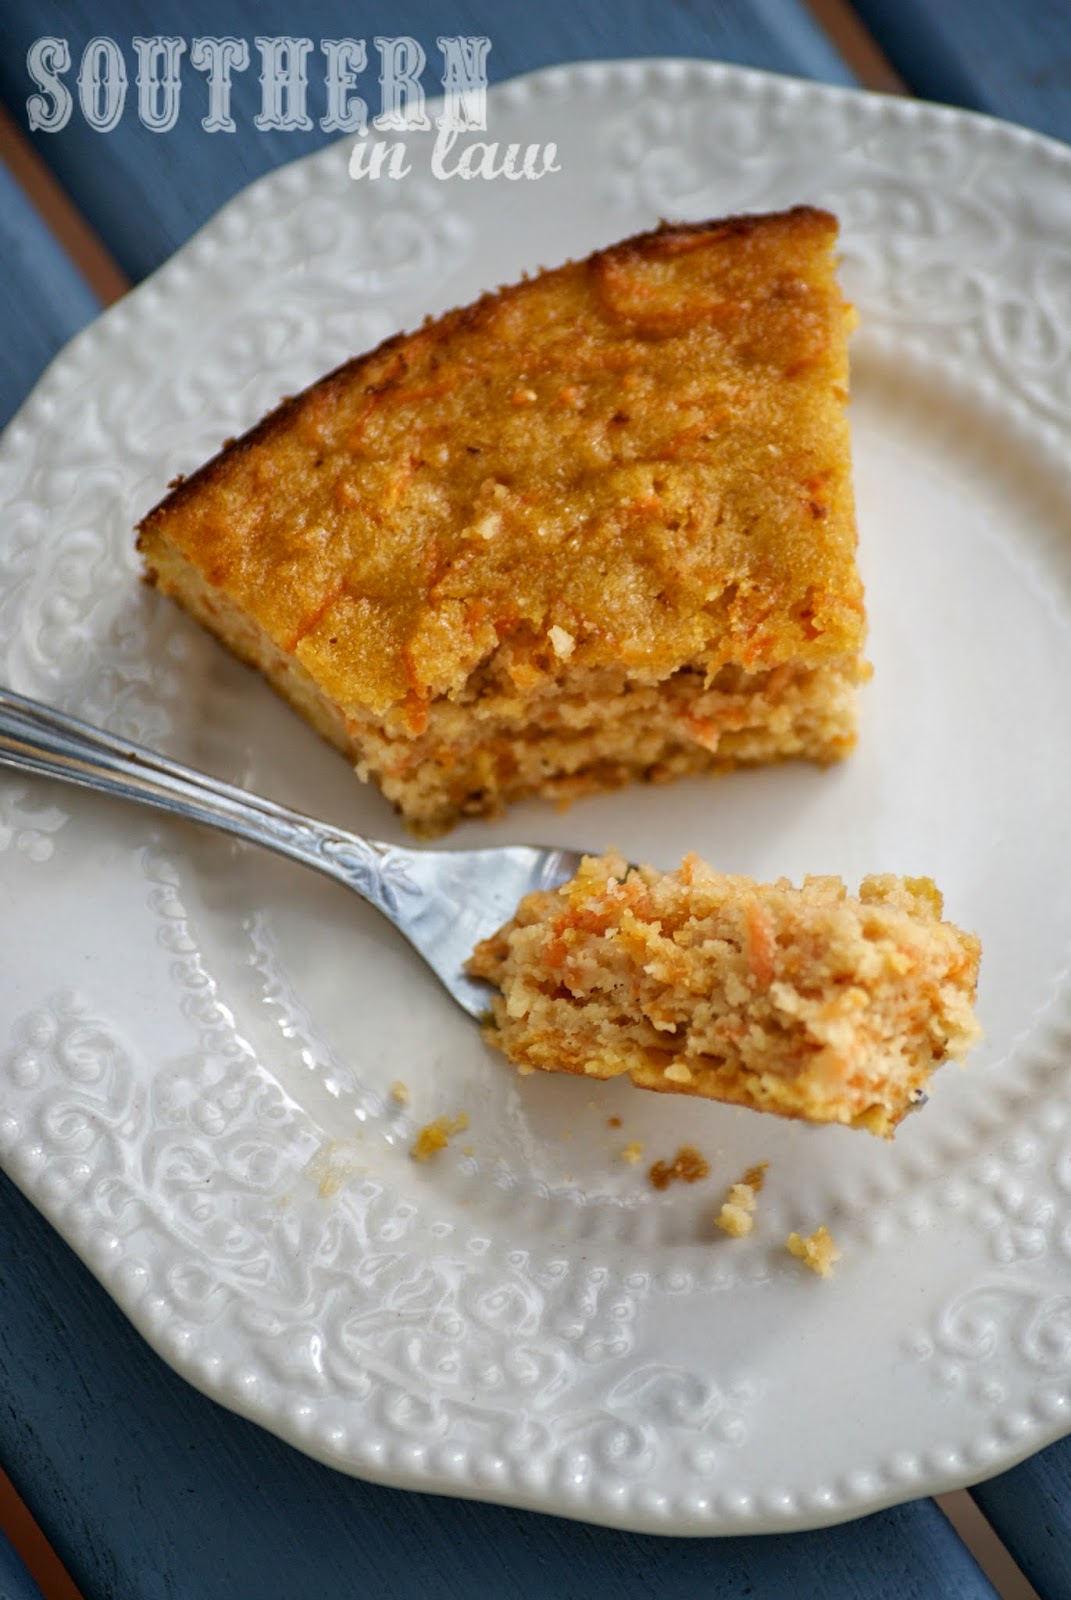 Healthy Carrot and Almond Cake Recipe - Gluten free, low fat, low sugar